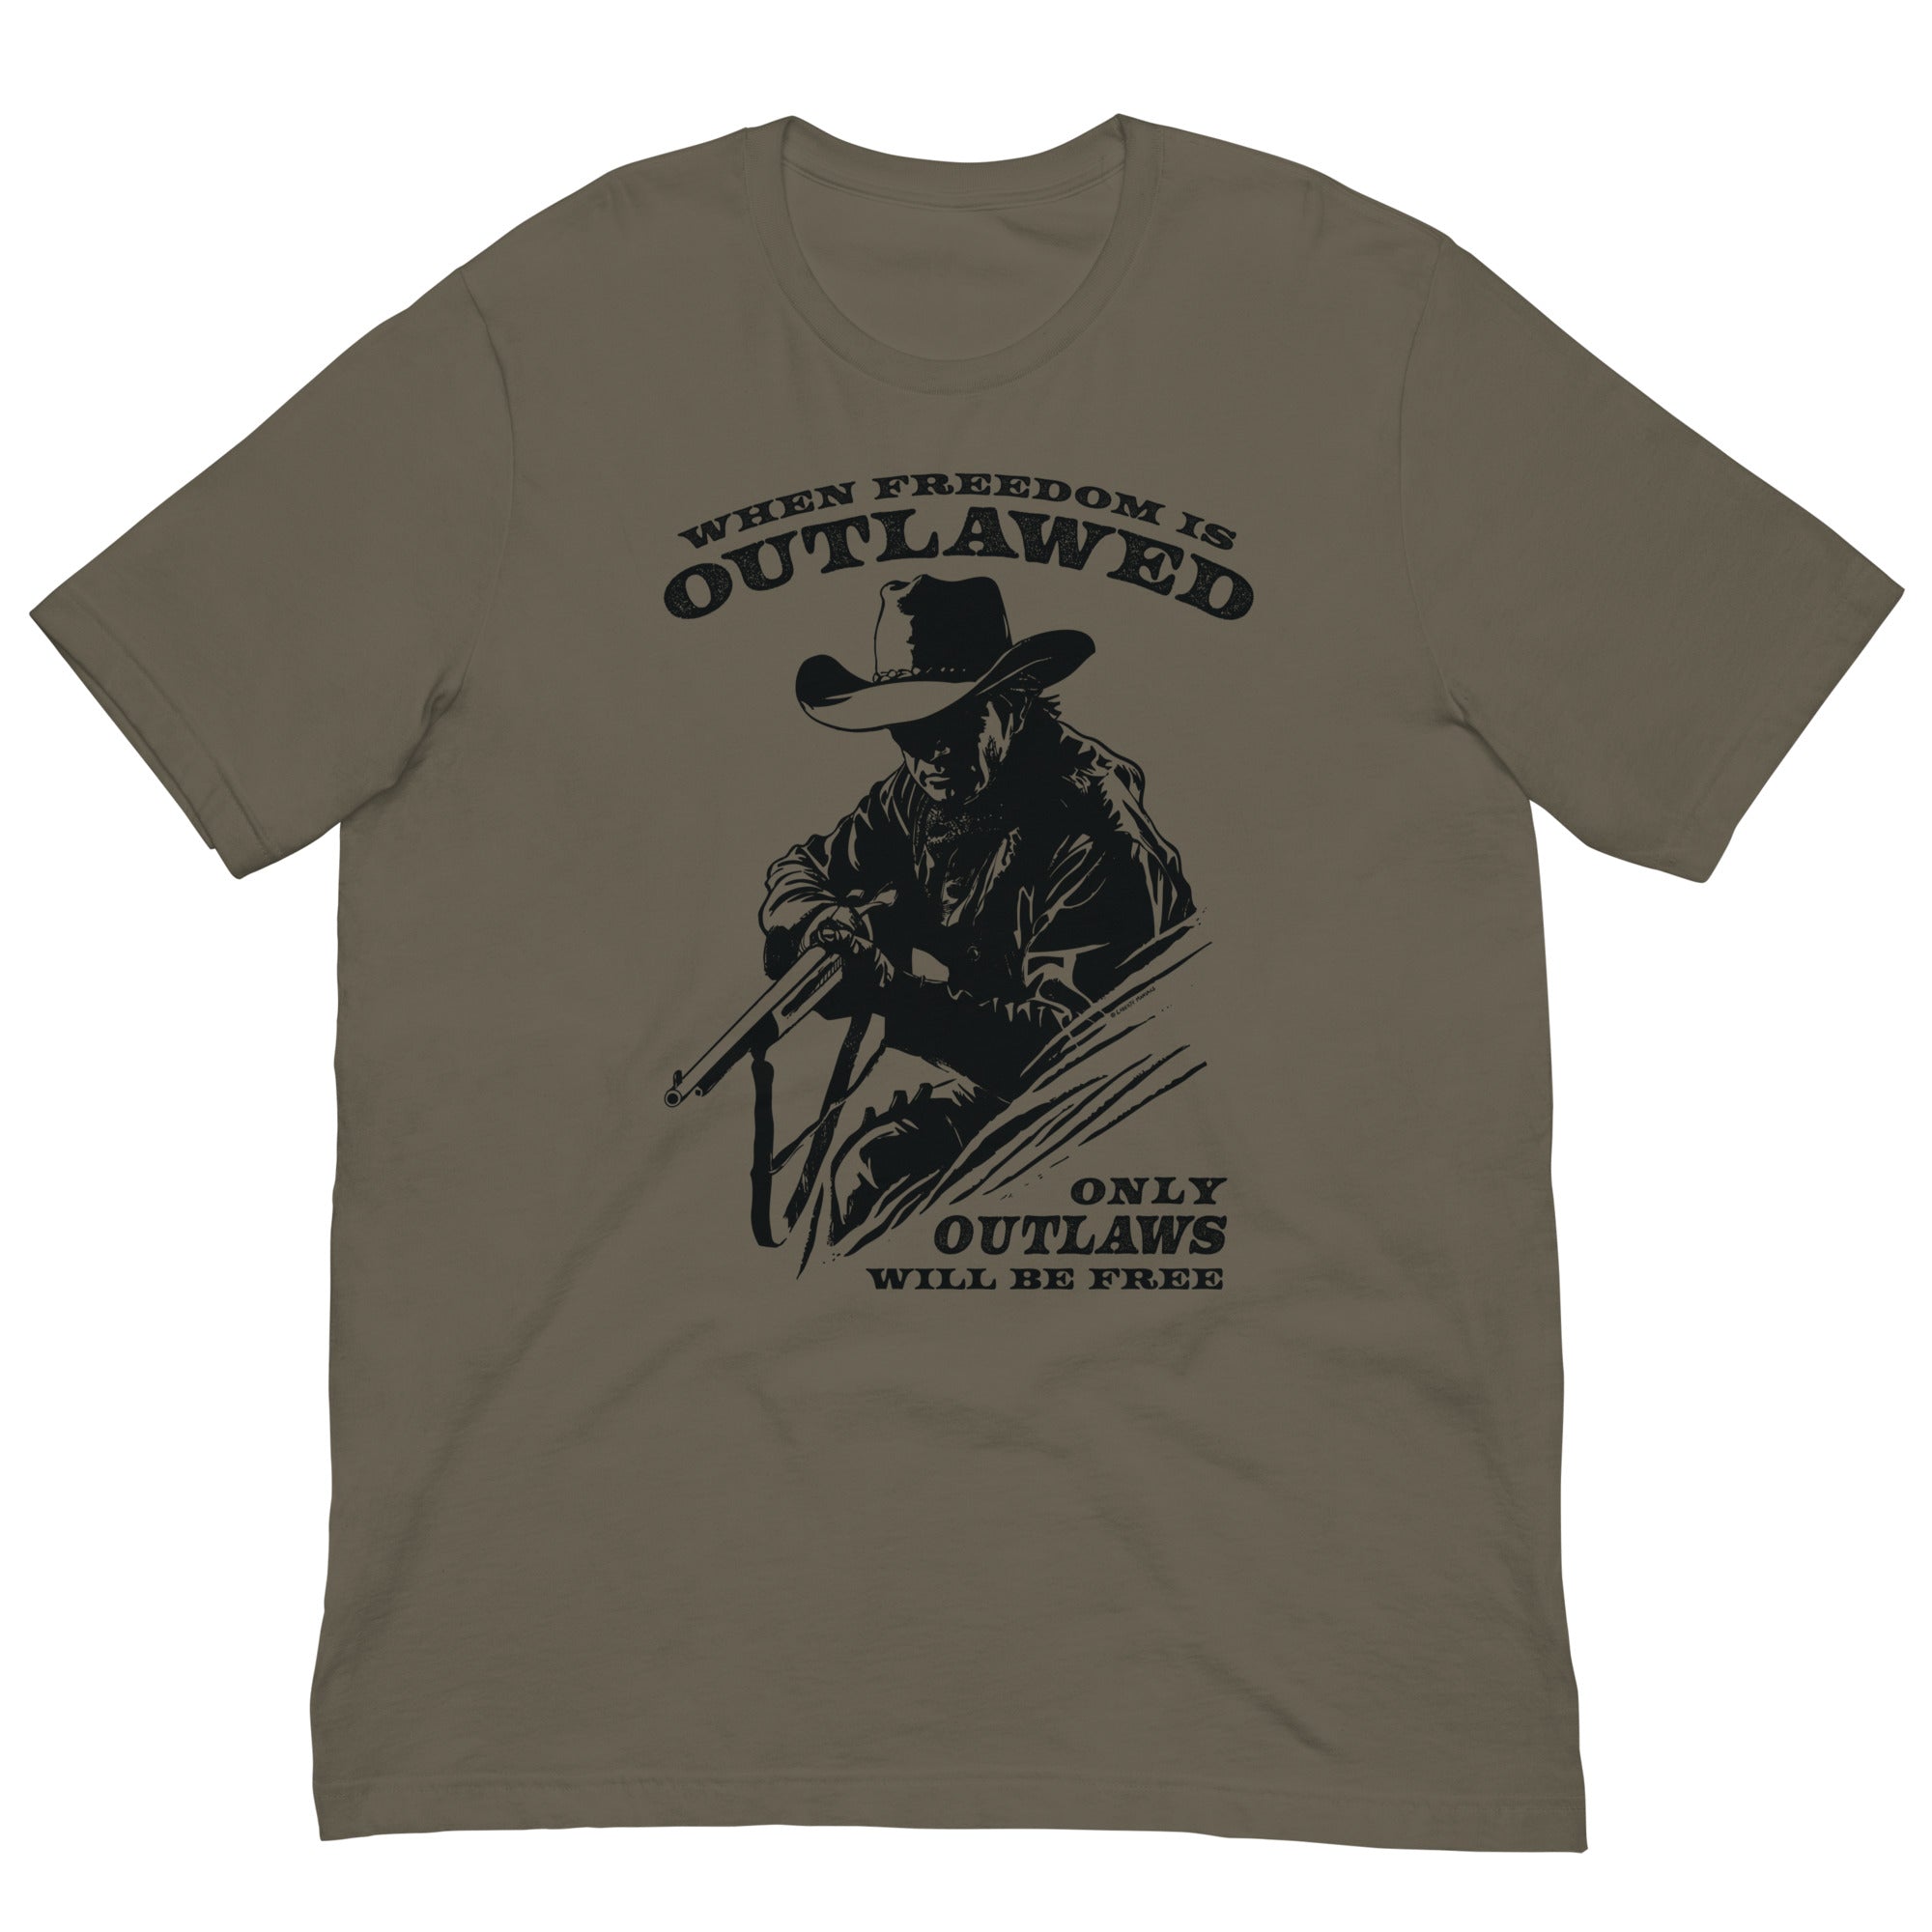 When Freedom is Outlawed Only Outlaws Will Be Free T-Shirt